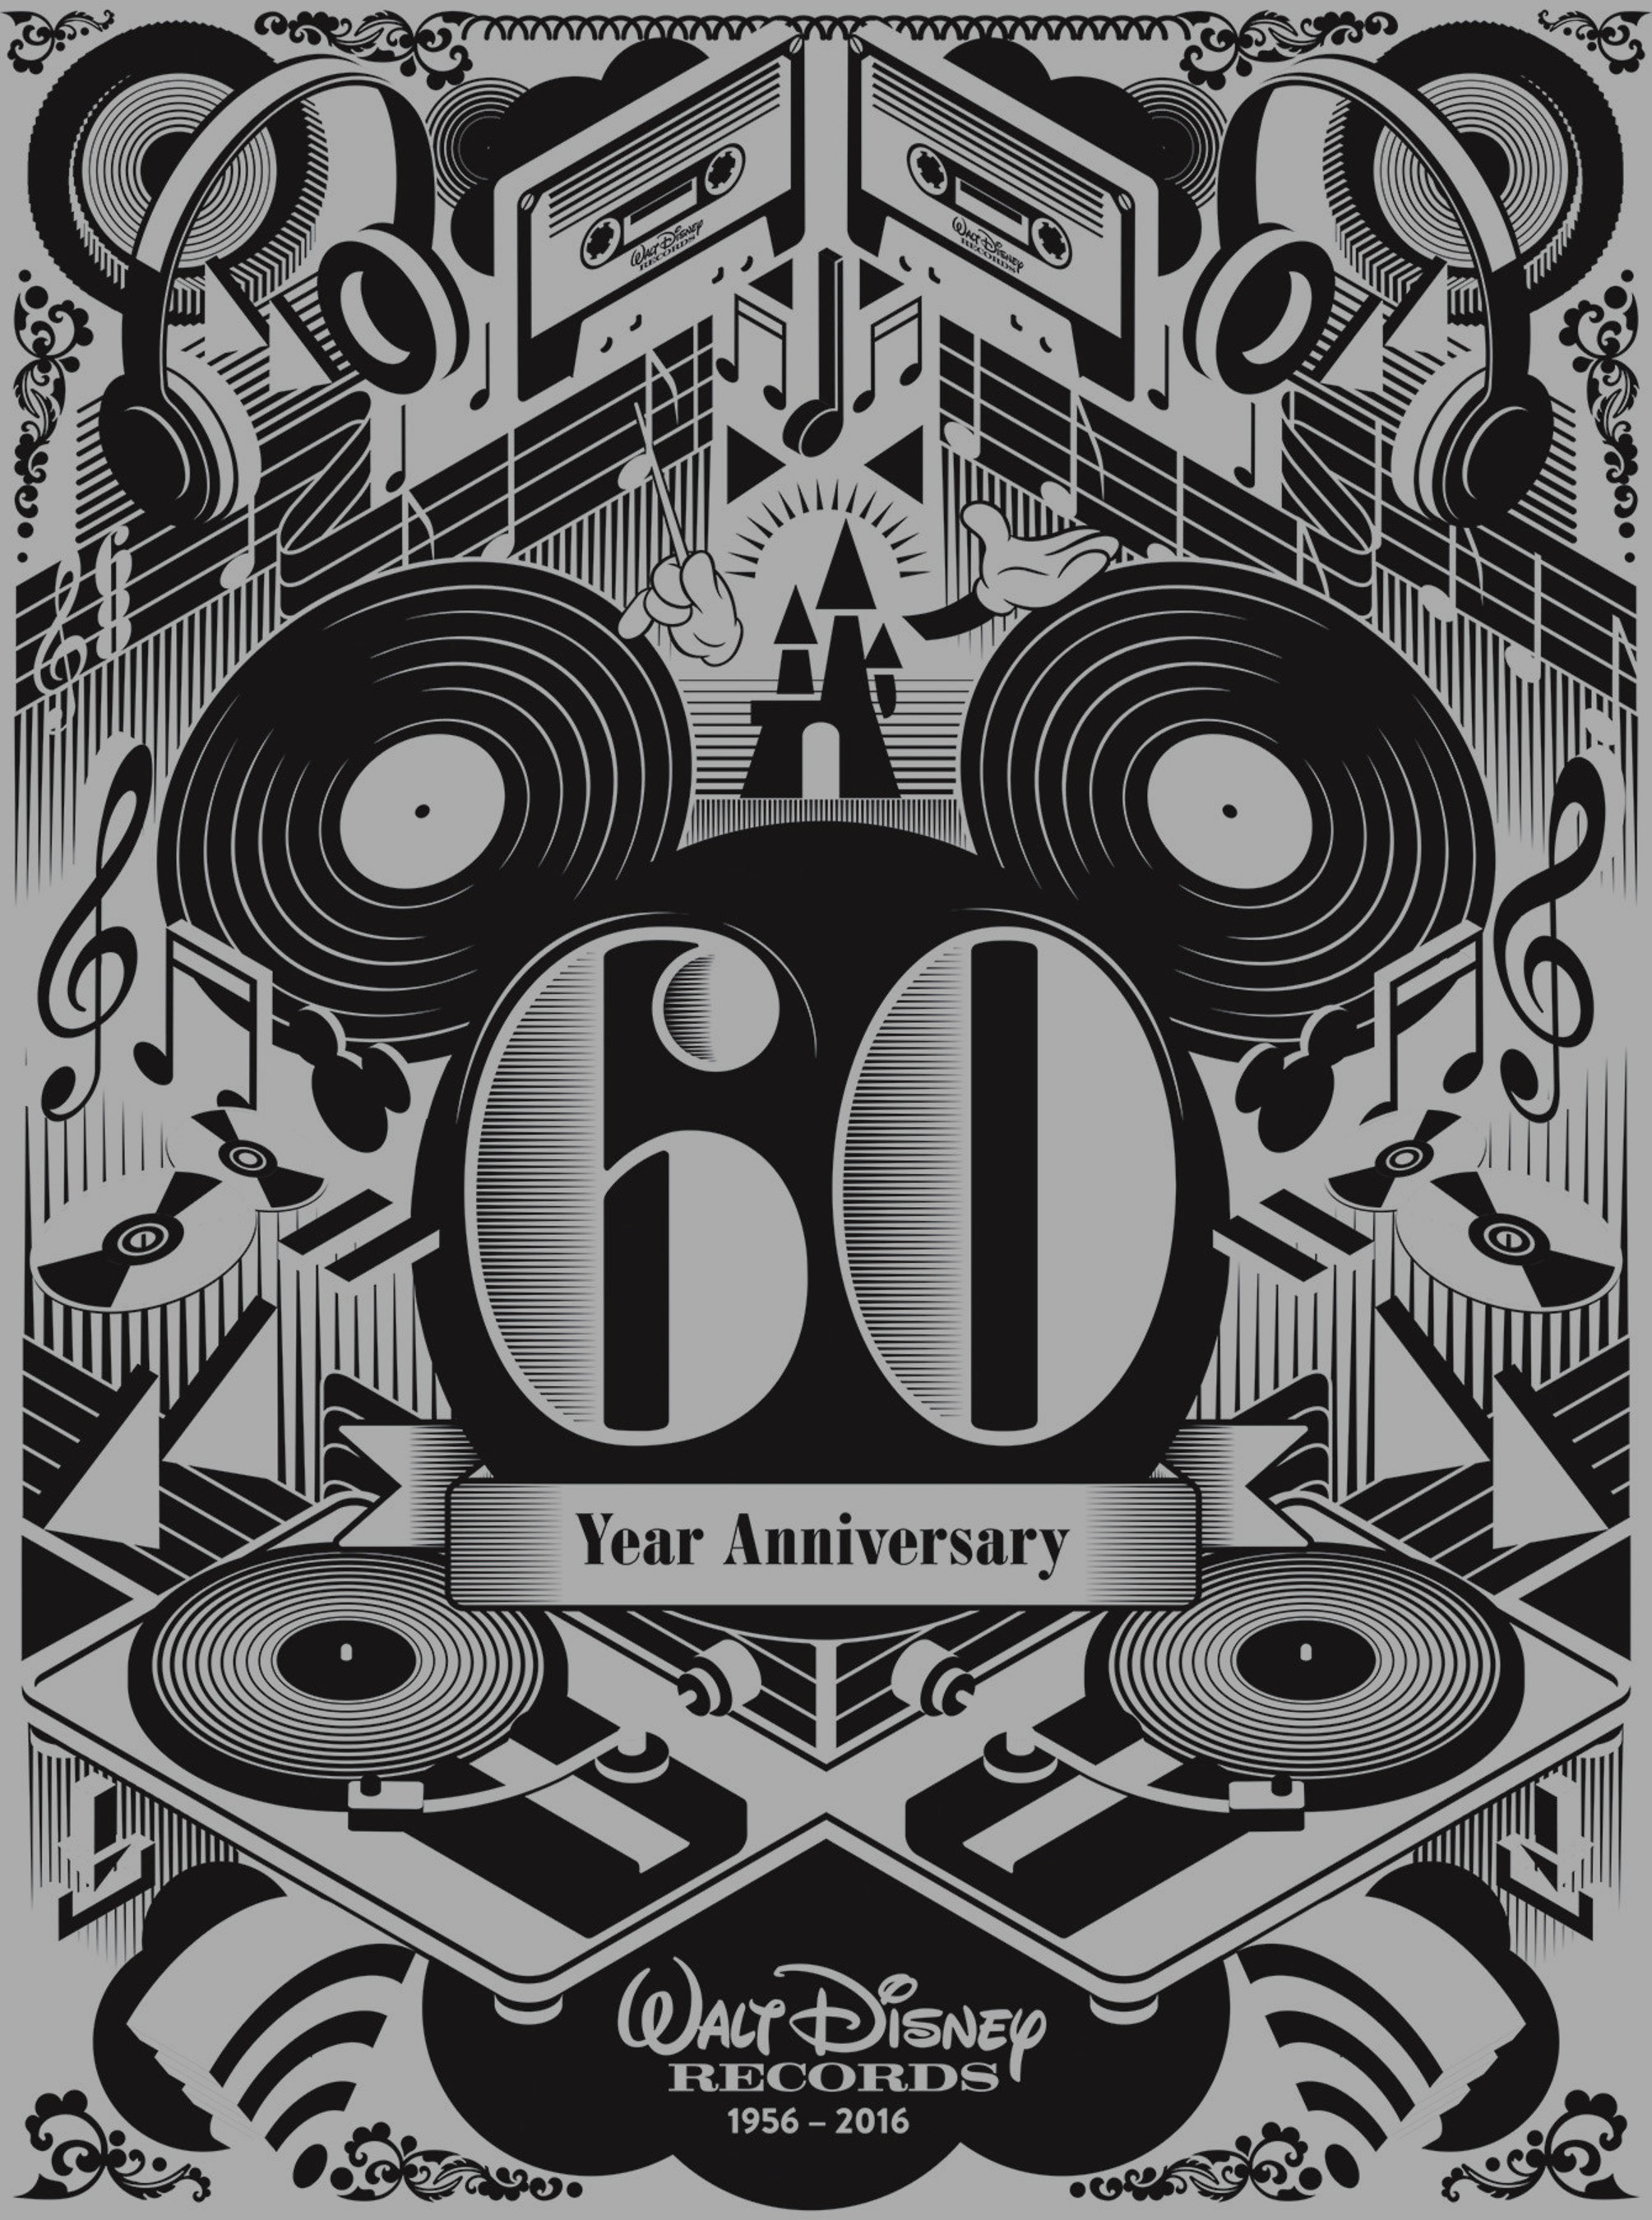 The special 60th Anniversary commemorative artwork designed by UK-based graphic artist Steven Wilson.